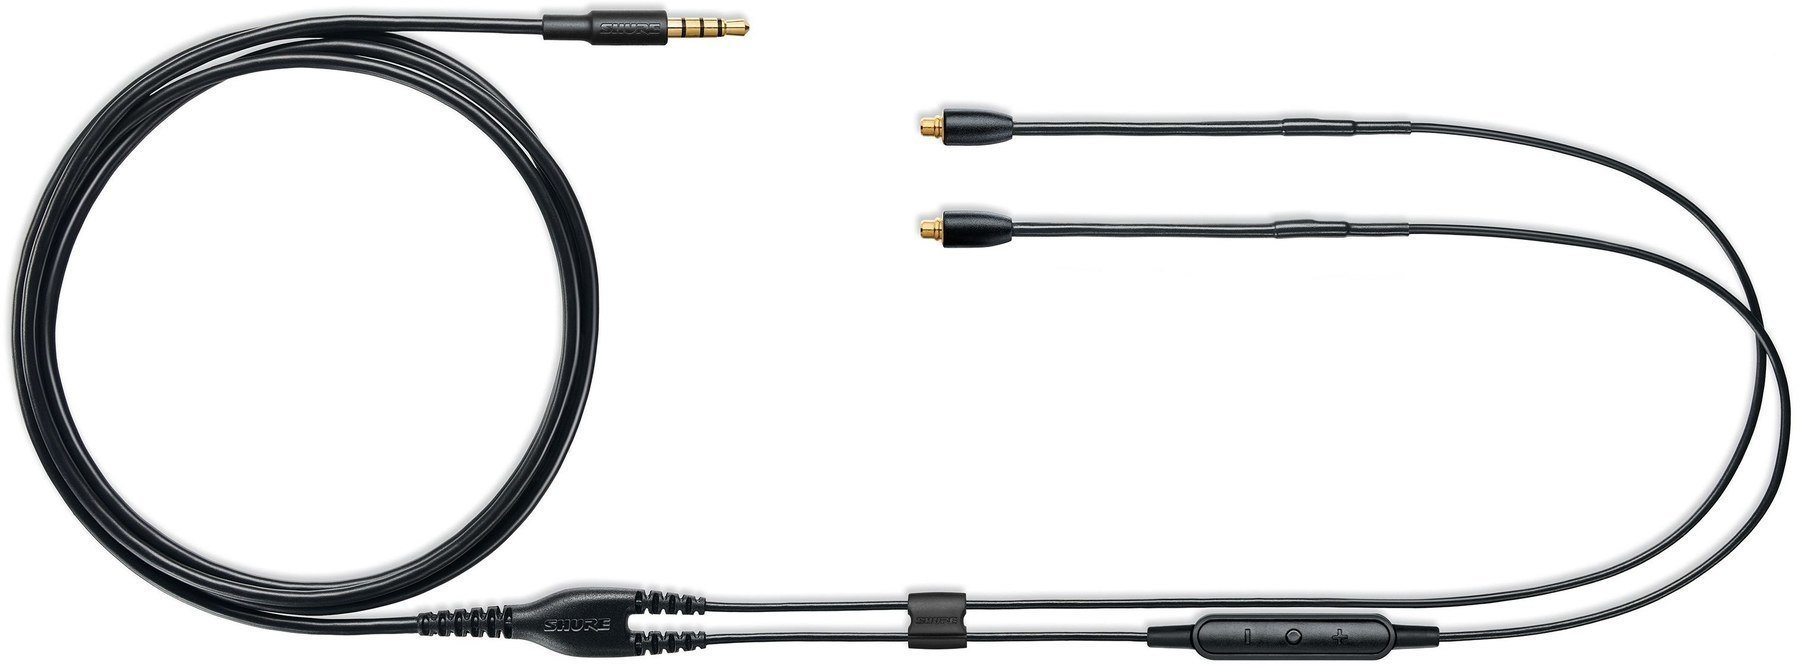 Headphone Cable Shure Headphone Cable